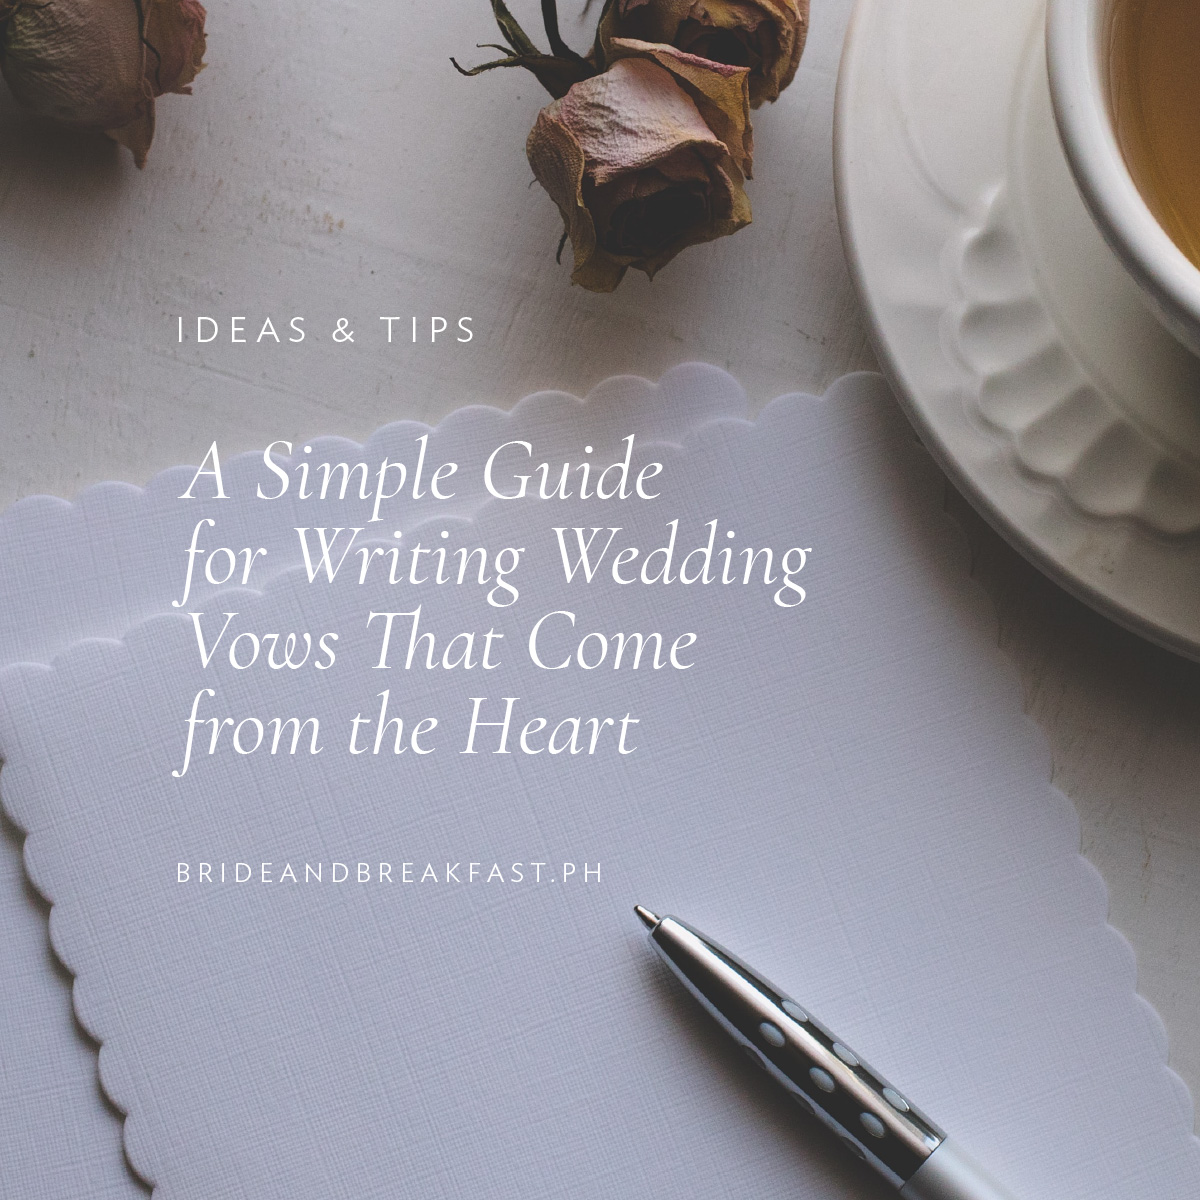 A Simple Guide for Writing Wedding Vows That Come from the Heart